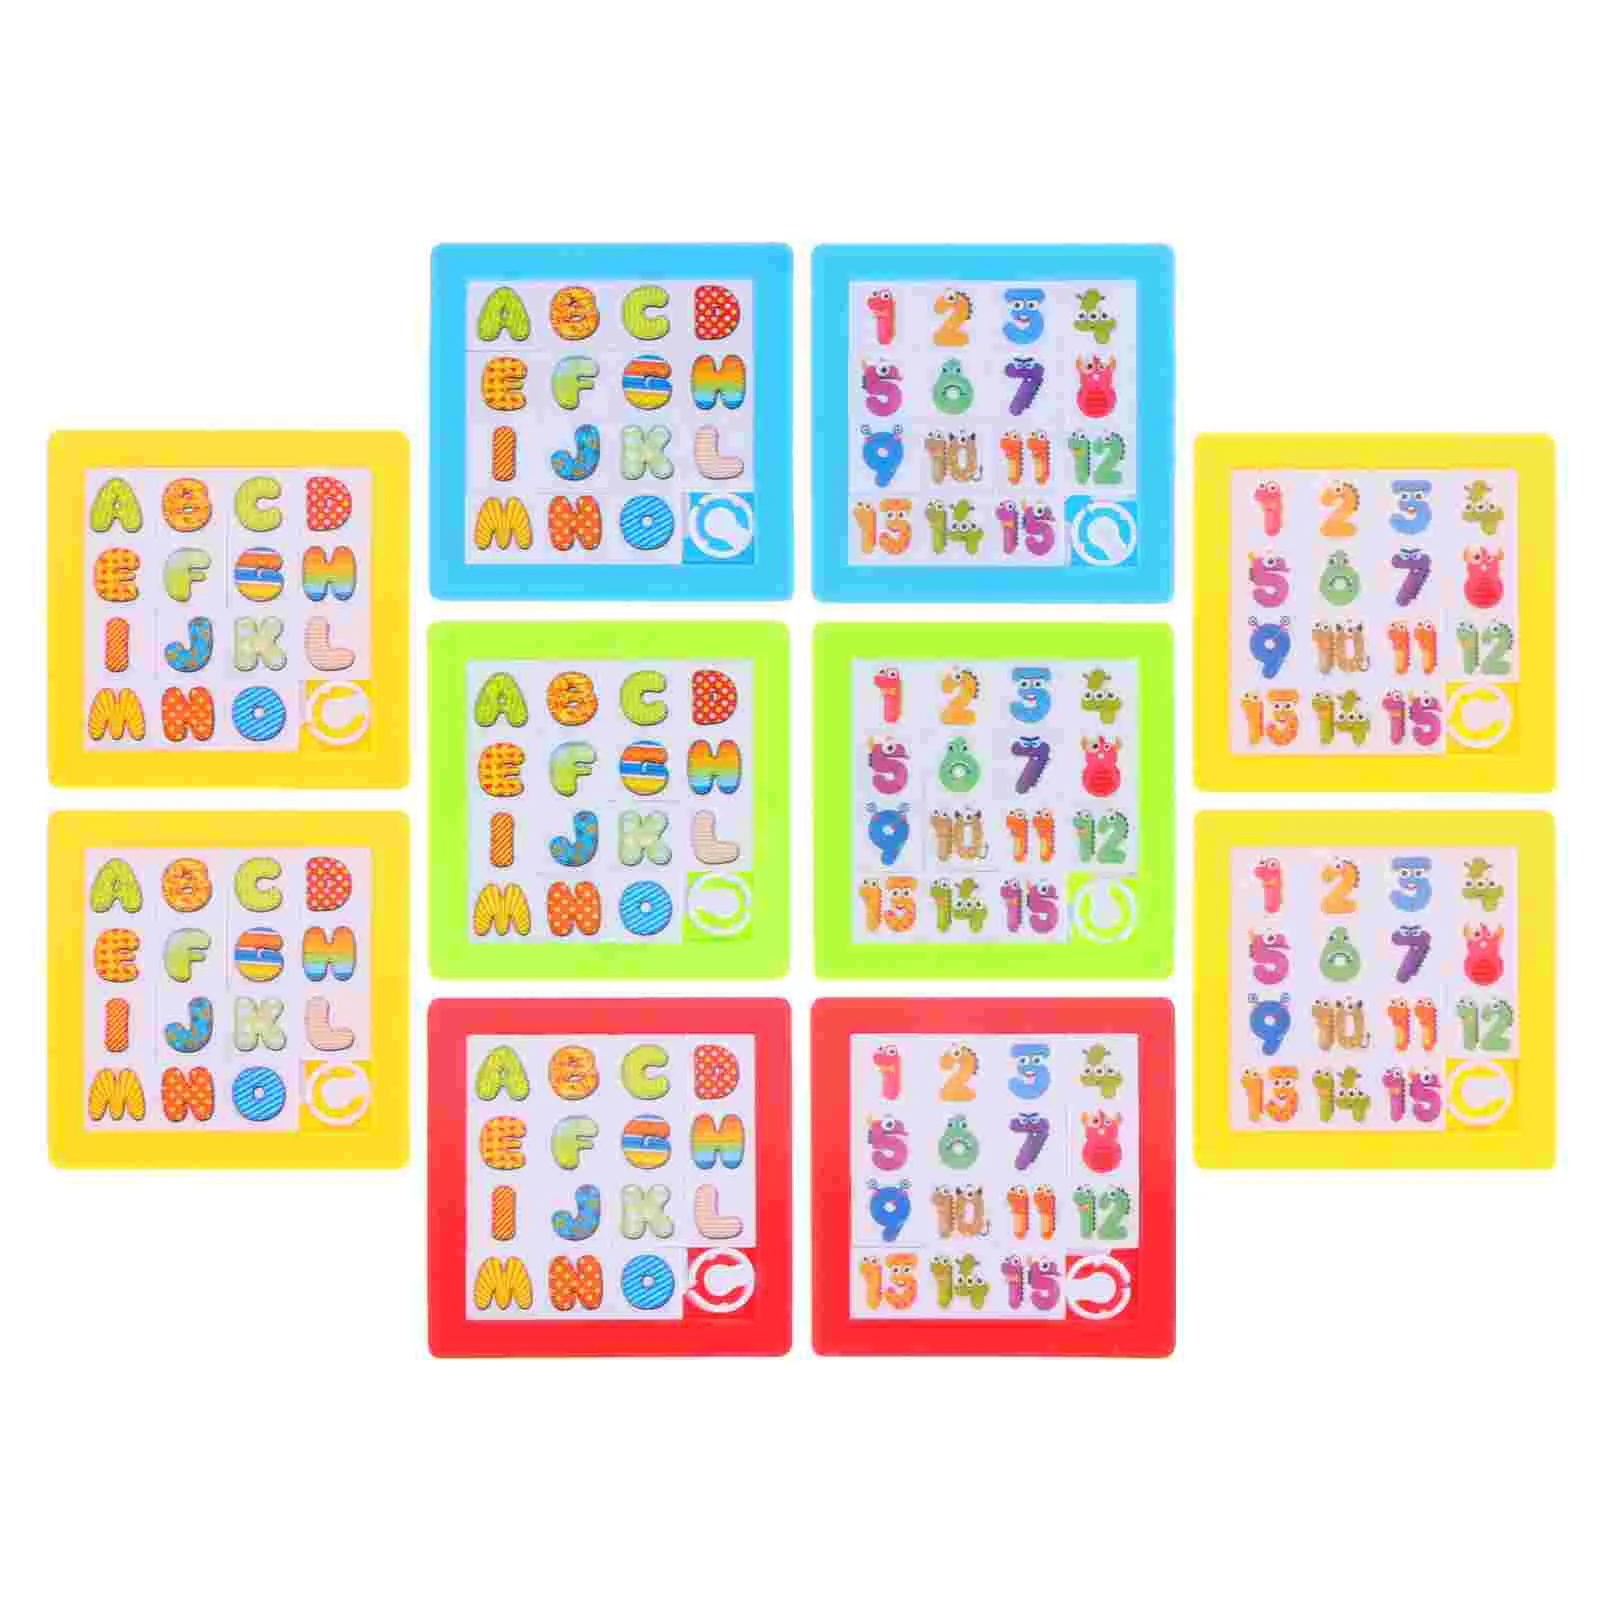 

10 Pcs Puzzle Logical Thinking Training Toys Number Cognition Cartoon Letters Adult Colored Slide Alphabet Slideshow